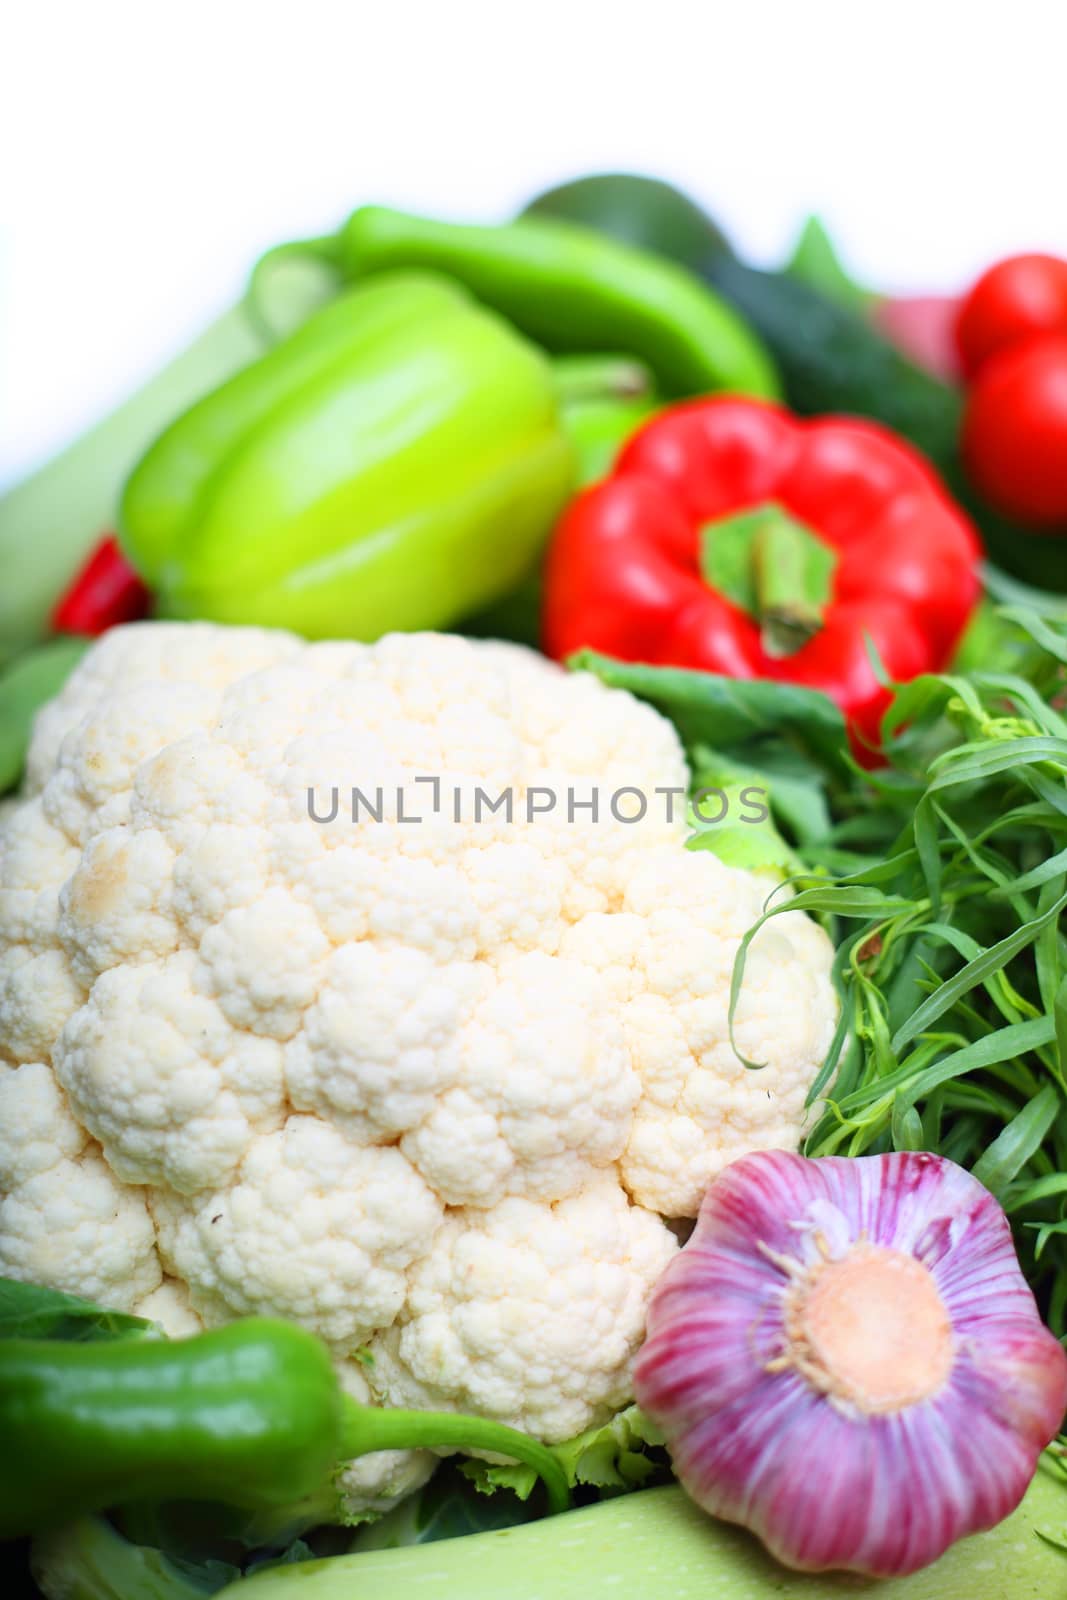 Pile of vegetables isolated on white background with copy space